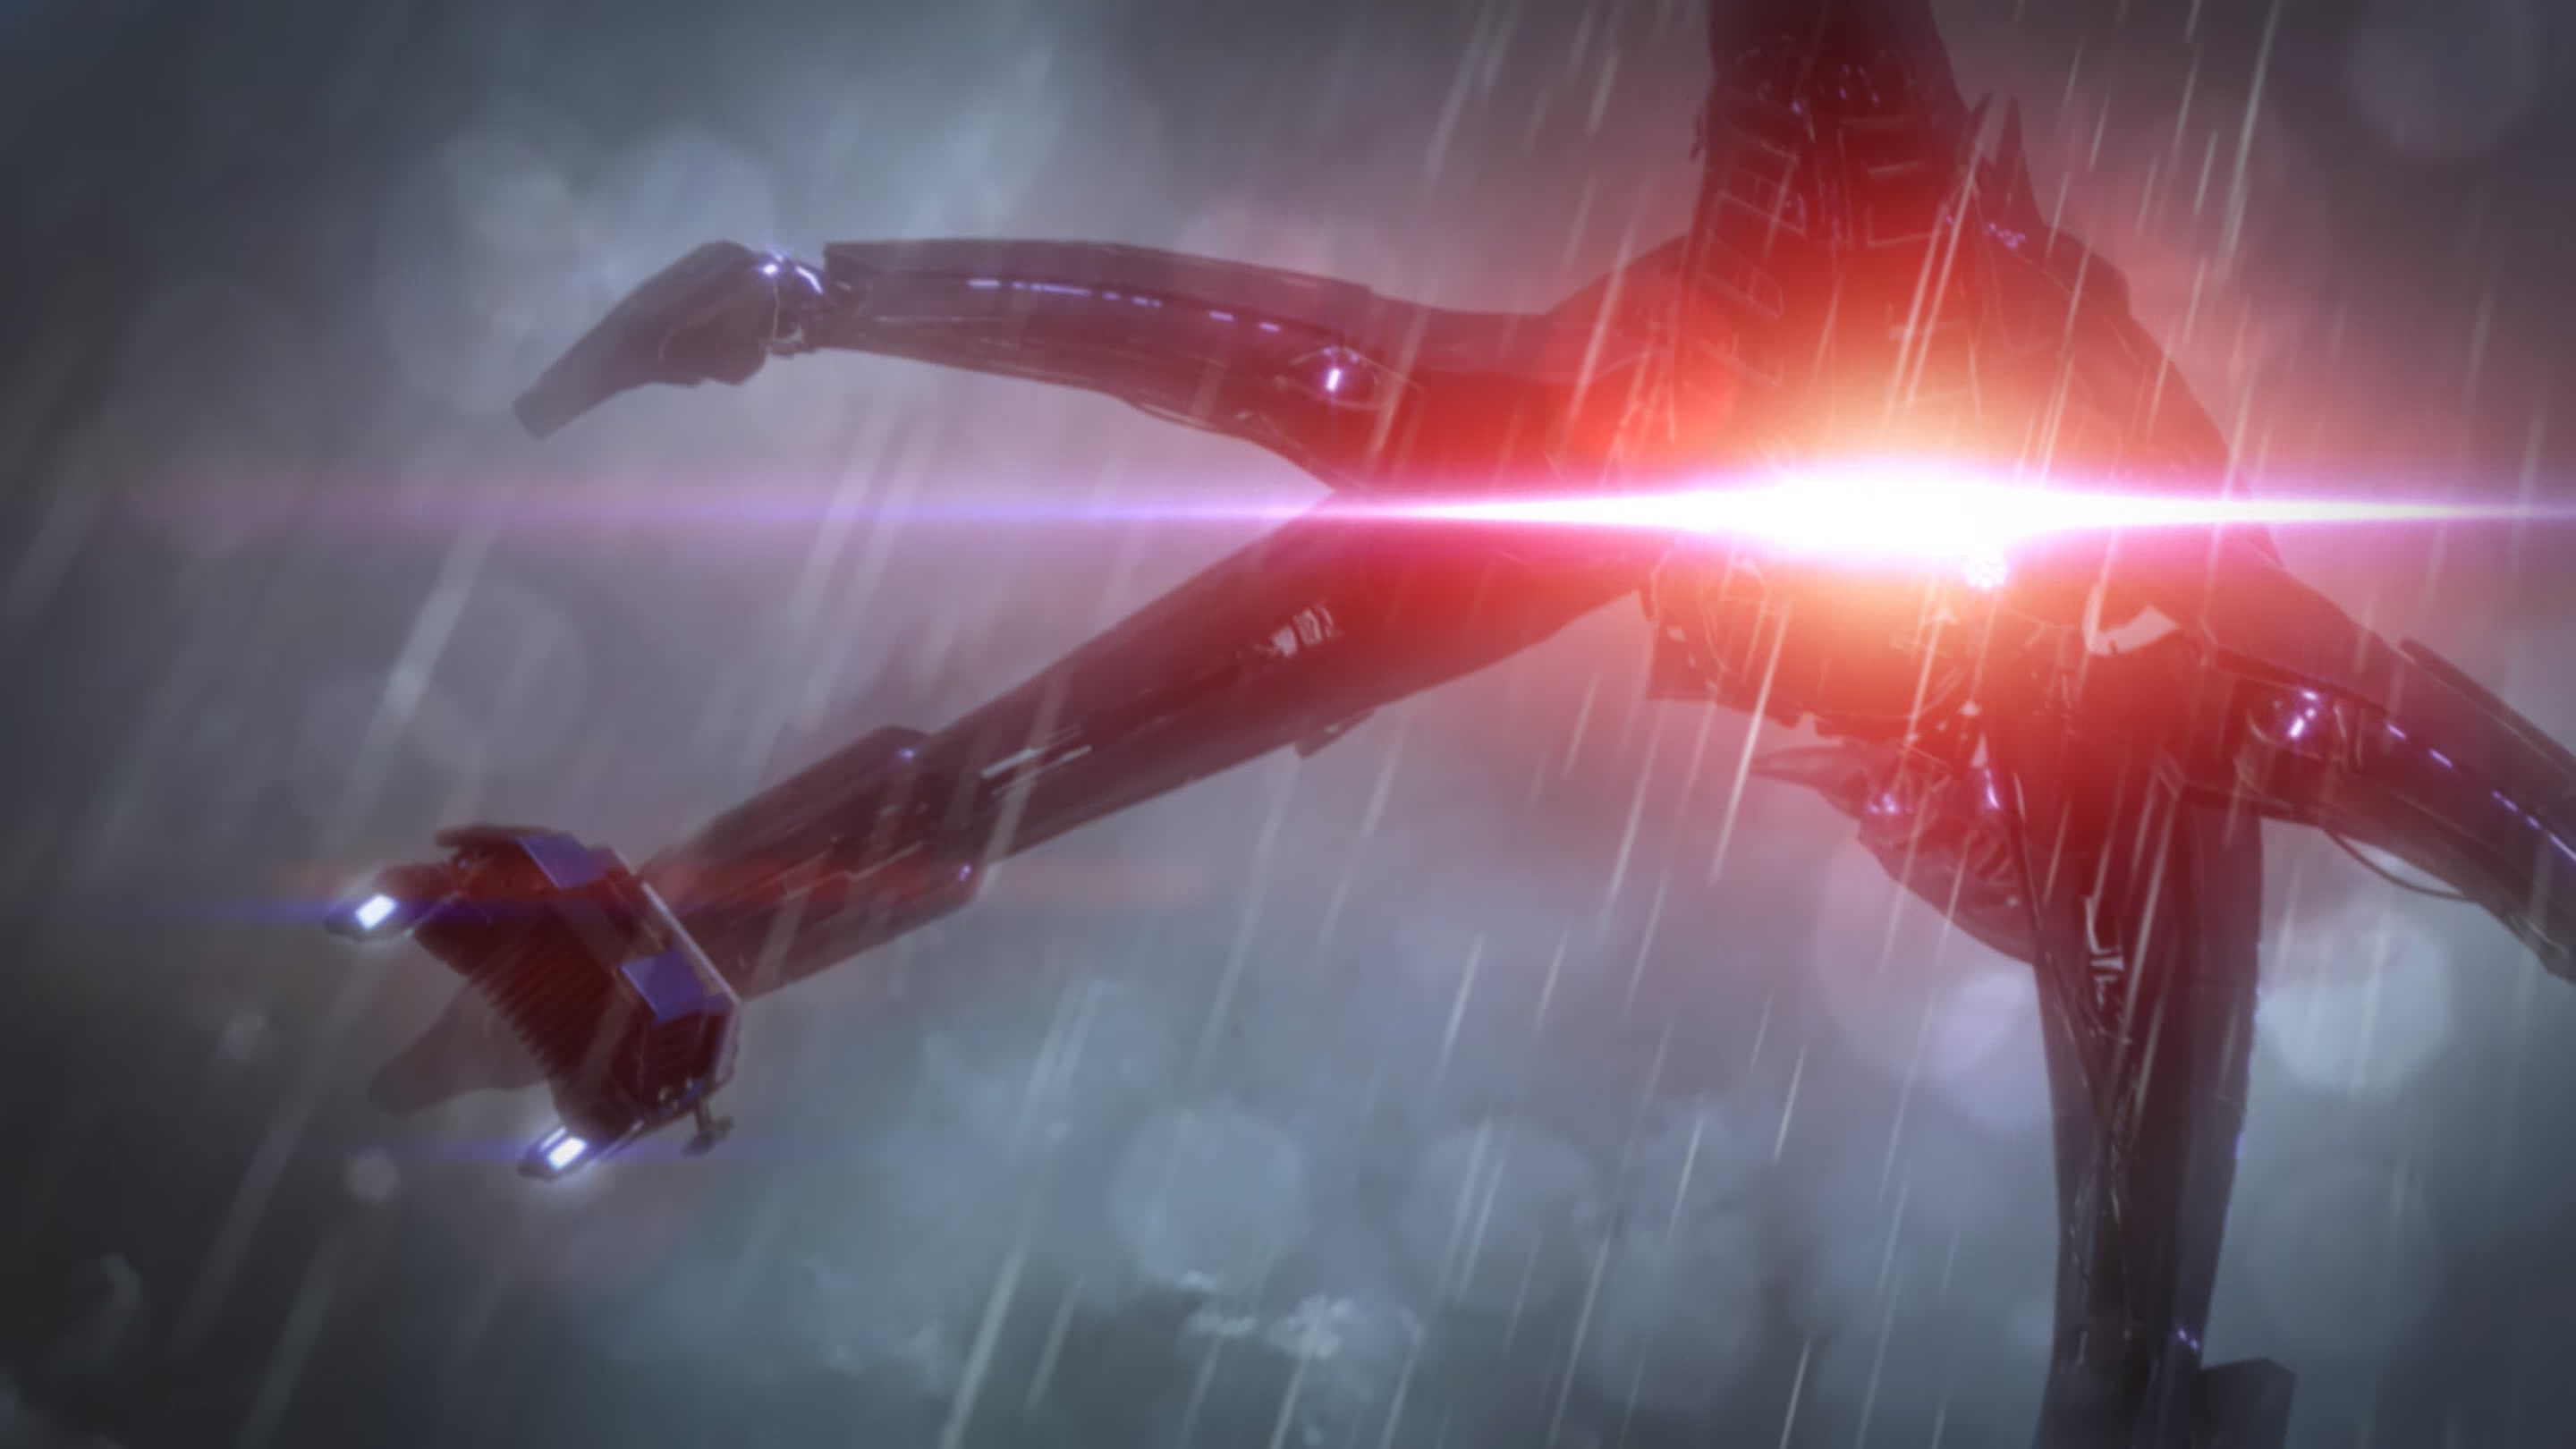 Gta 5 mod replaces the blimp with mass effect 3s reaper ship - Gamesca- find more games